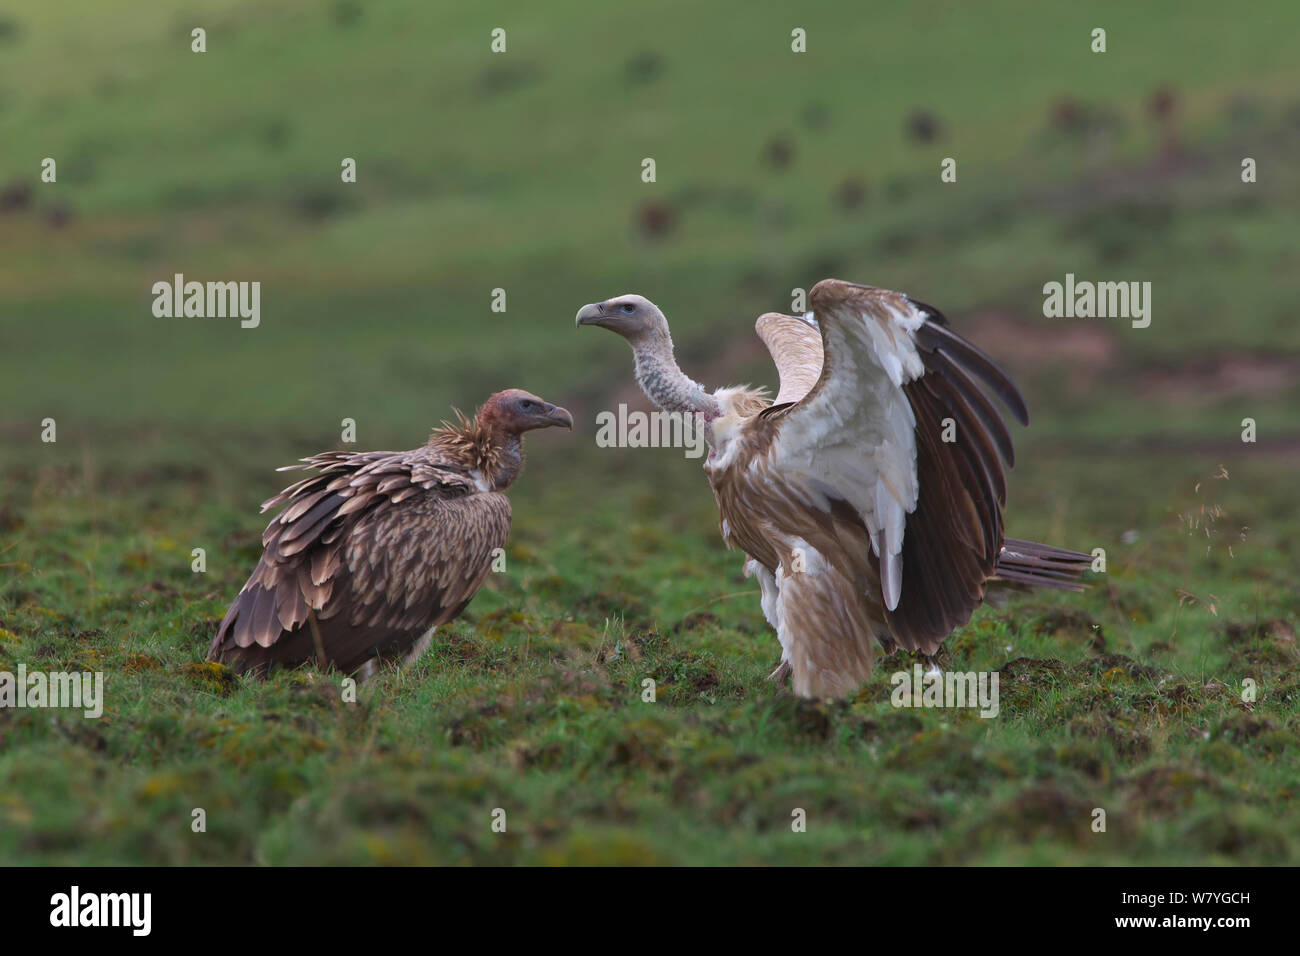 Himalayan griffon vultures (Gyps himalayensis) one with wings stretched, Ruoergai National Nature Reserve, Sichuan Province, China, August., January. Stock Photo